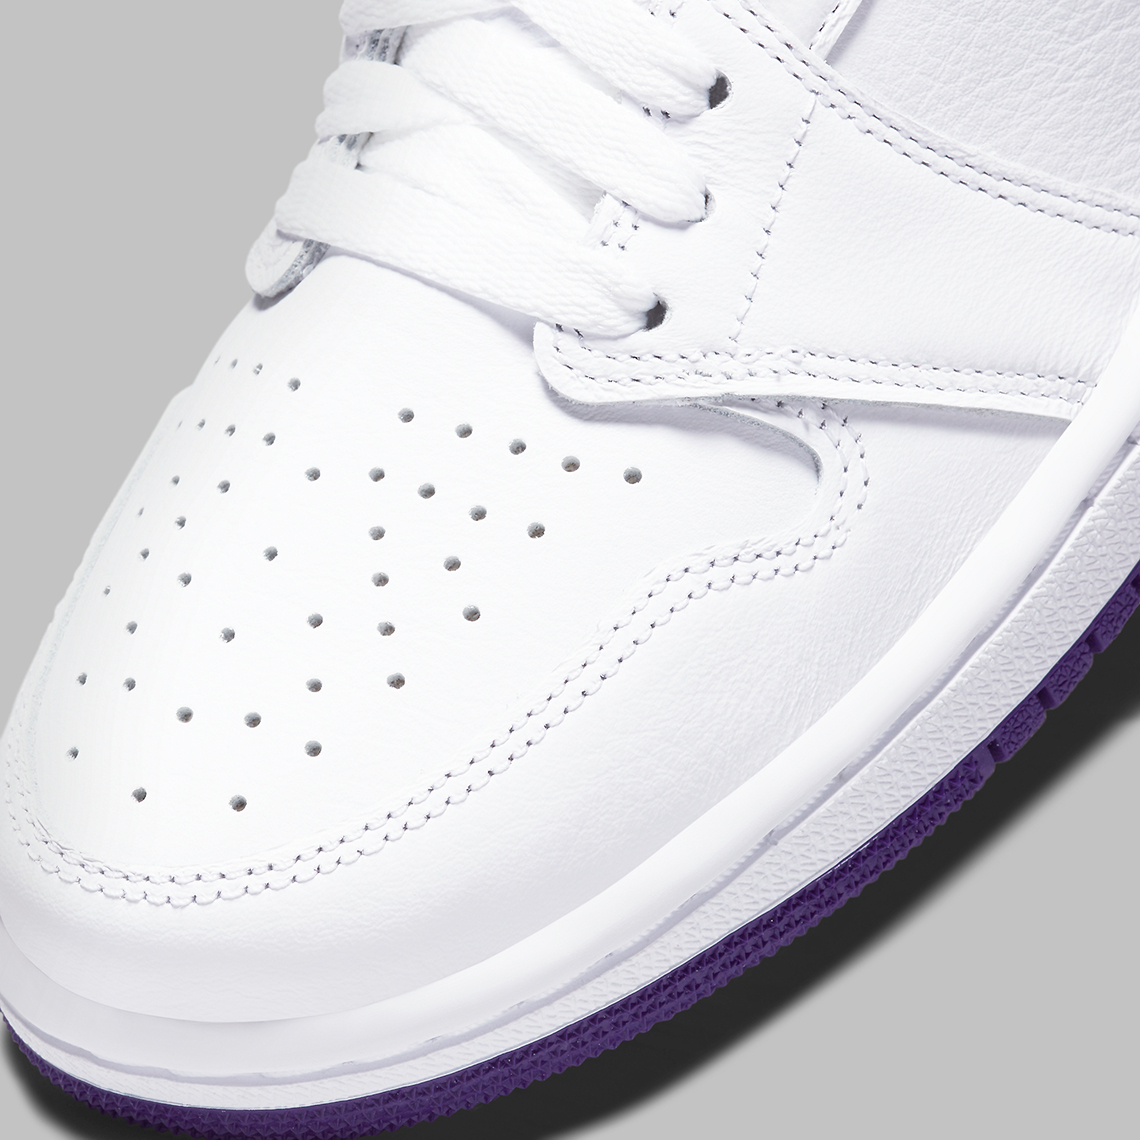 Synthetic leather strap with Jordan branding Retro High Og Wmns White Court Purple Cd0461 151 5